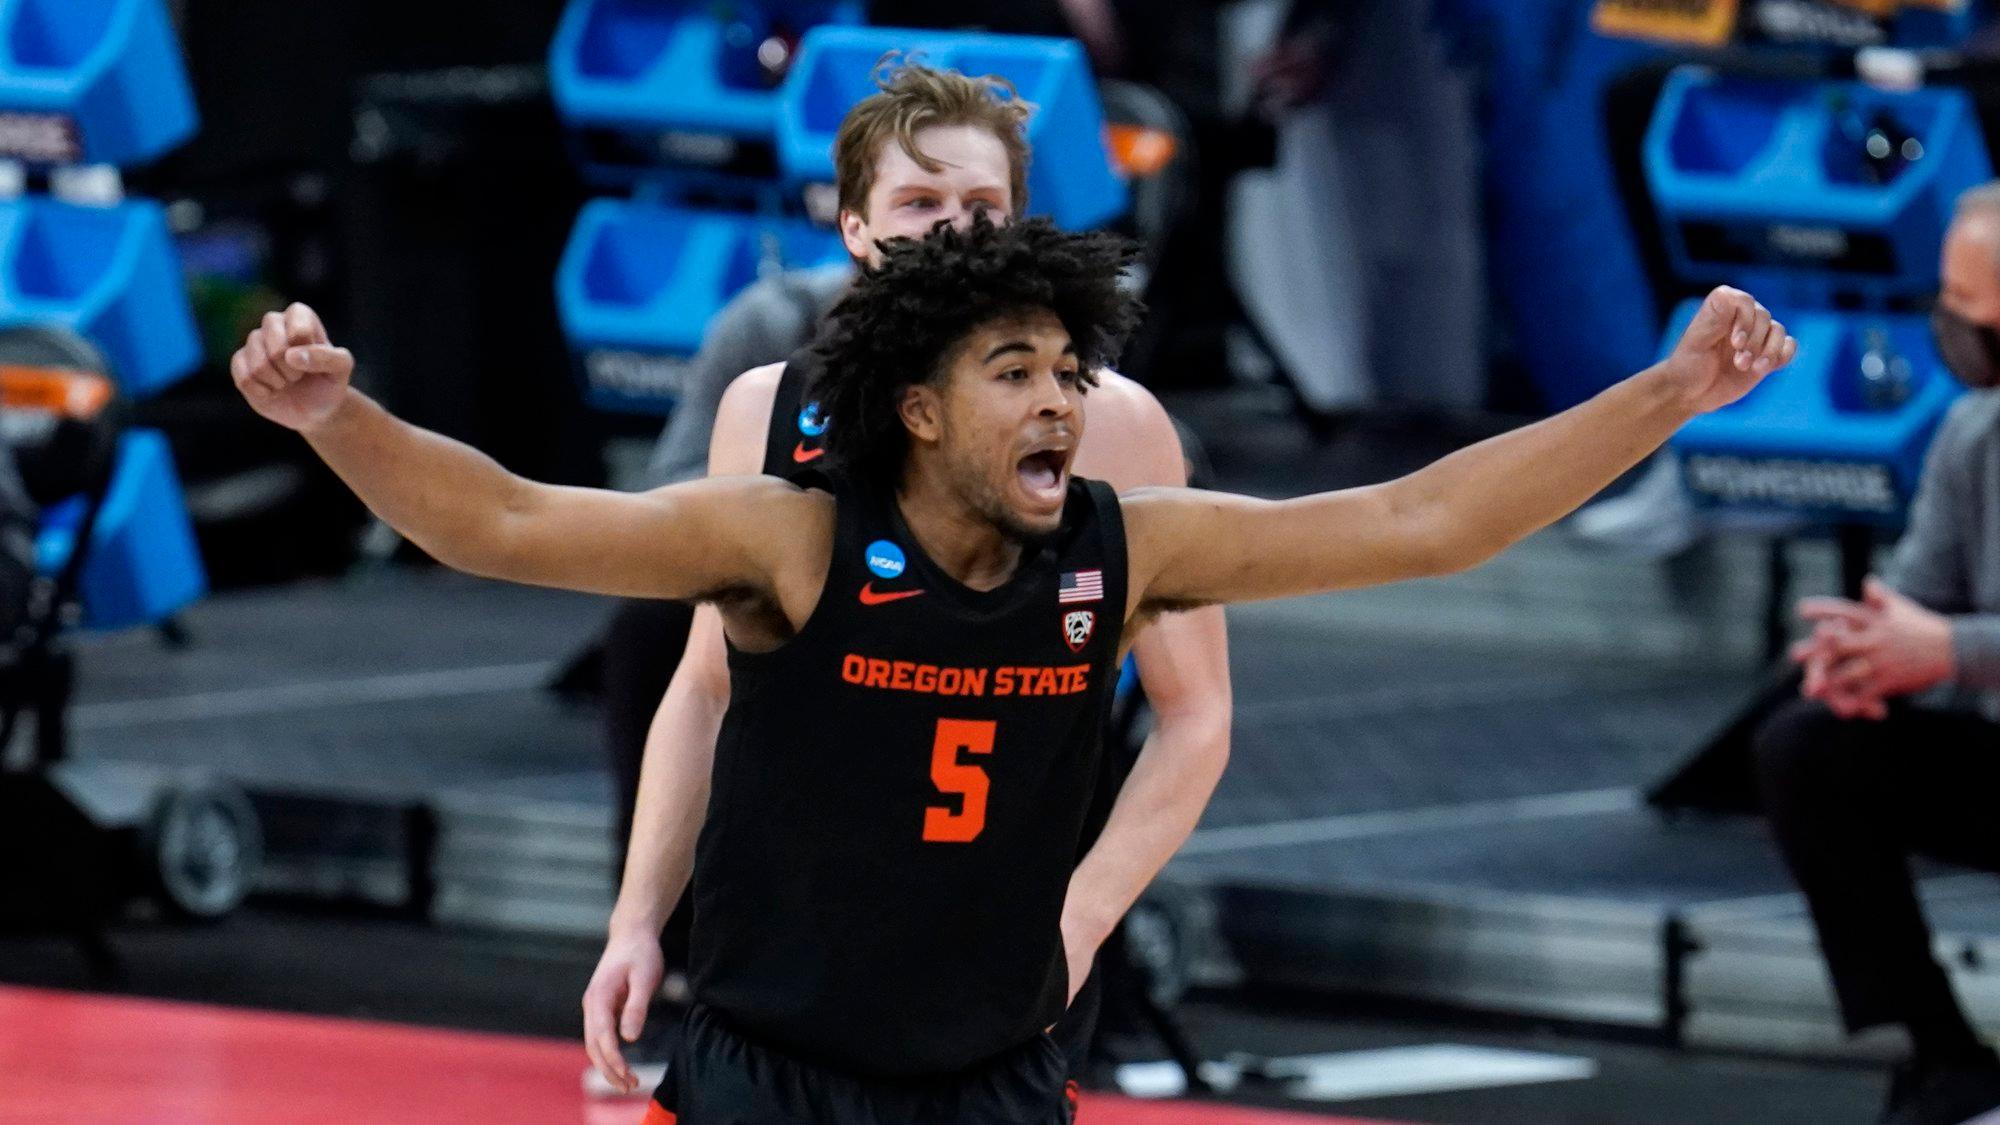 Oregon State guard Ethan Thompson (5) reacts to a basket against Tennessee during the second half of a men's college basketball game in the first round of the NCAA tournament at Bankers Life Fieldhouse in Indianapolis, Friday, March 19, 2021. (AP Photo/Paul Sancya)